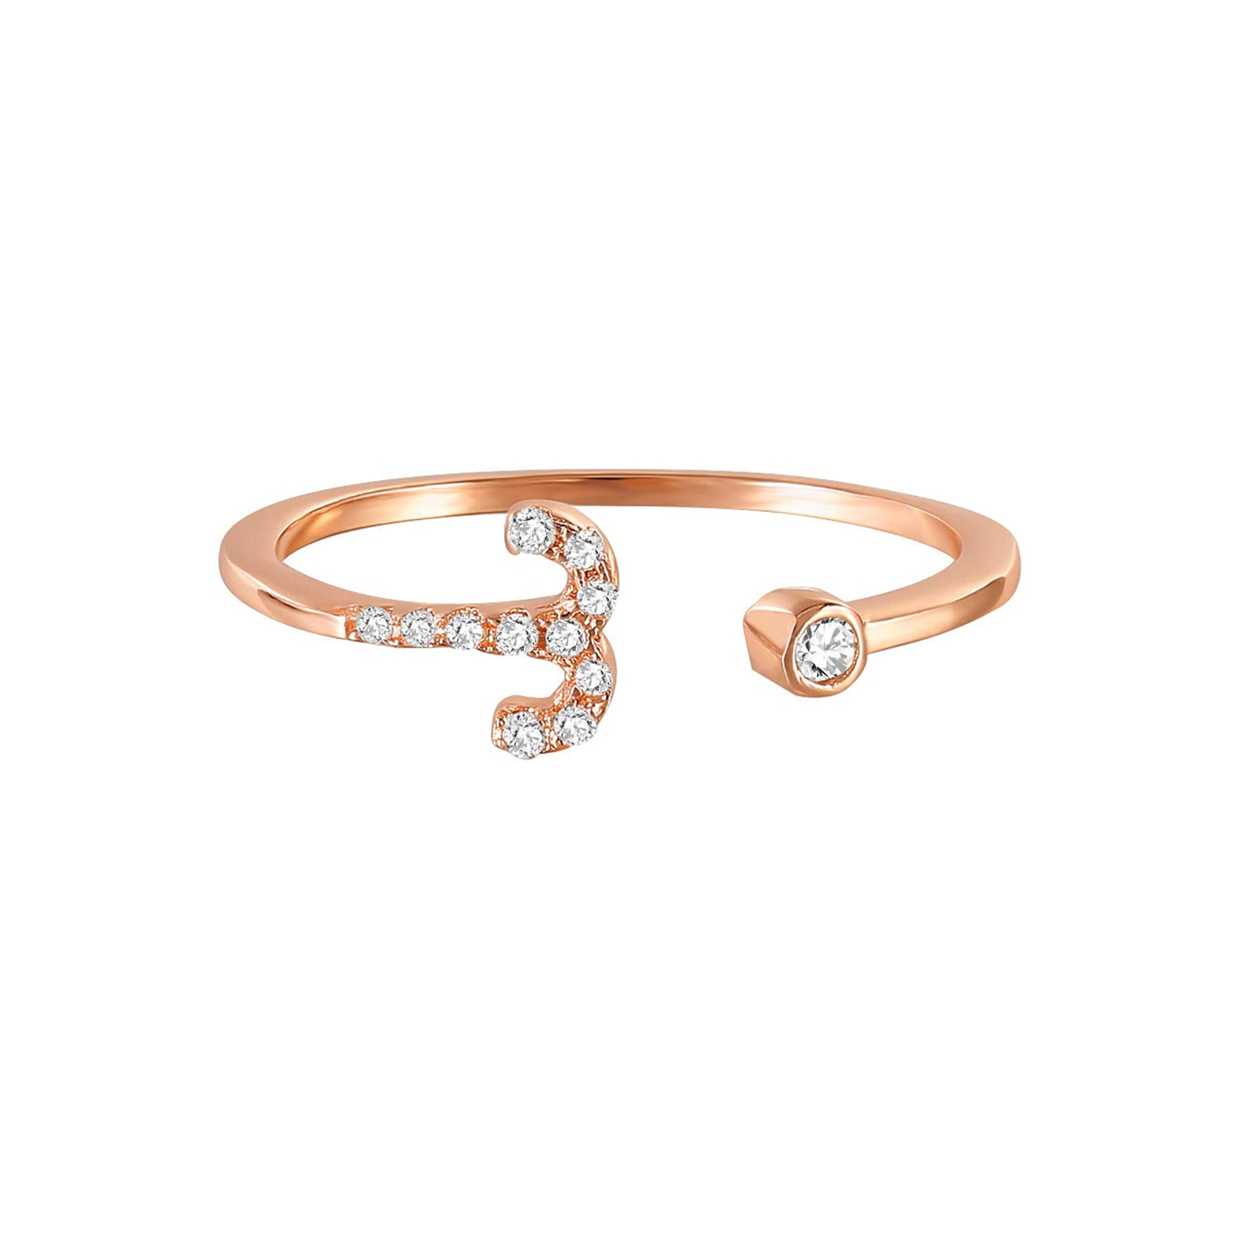 Aries Ring (March 21 - April 19)